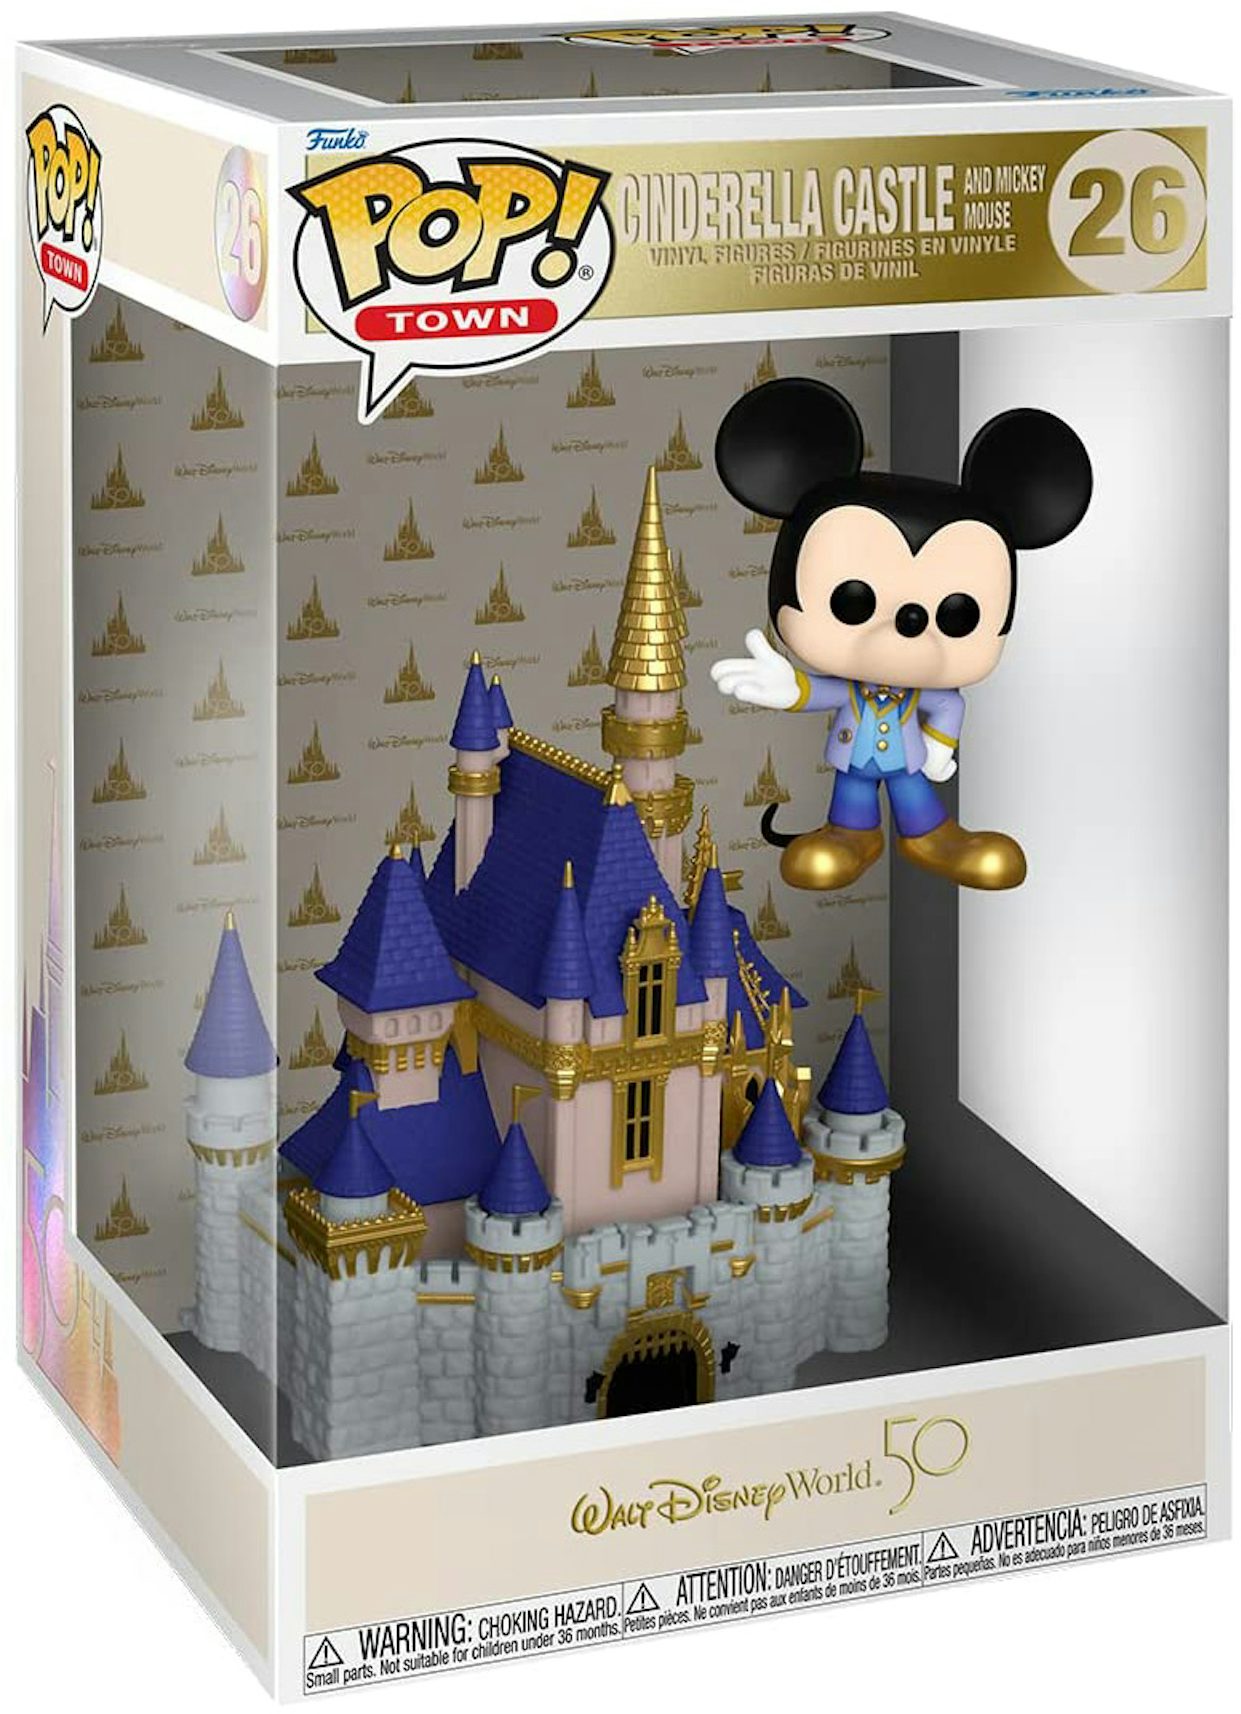 https://images.stockx.com/images/Funko-Pop-Town-Walt-Disney-World-50th-Anniversary-Cinderella-Castle-And-Mickey-Mouse-Figure-26.jpg?fit=fill&bg=FFFFFF&w=1200&h=857&fm=jpg&auto=compress&dpr=2&trim=color&updated_at=1636058902&q=60